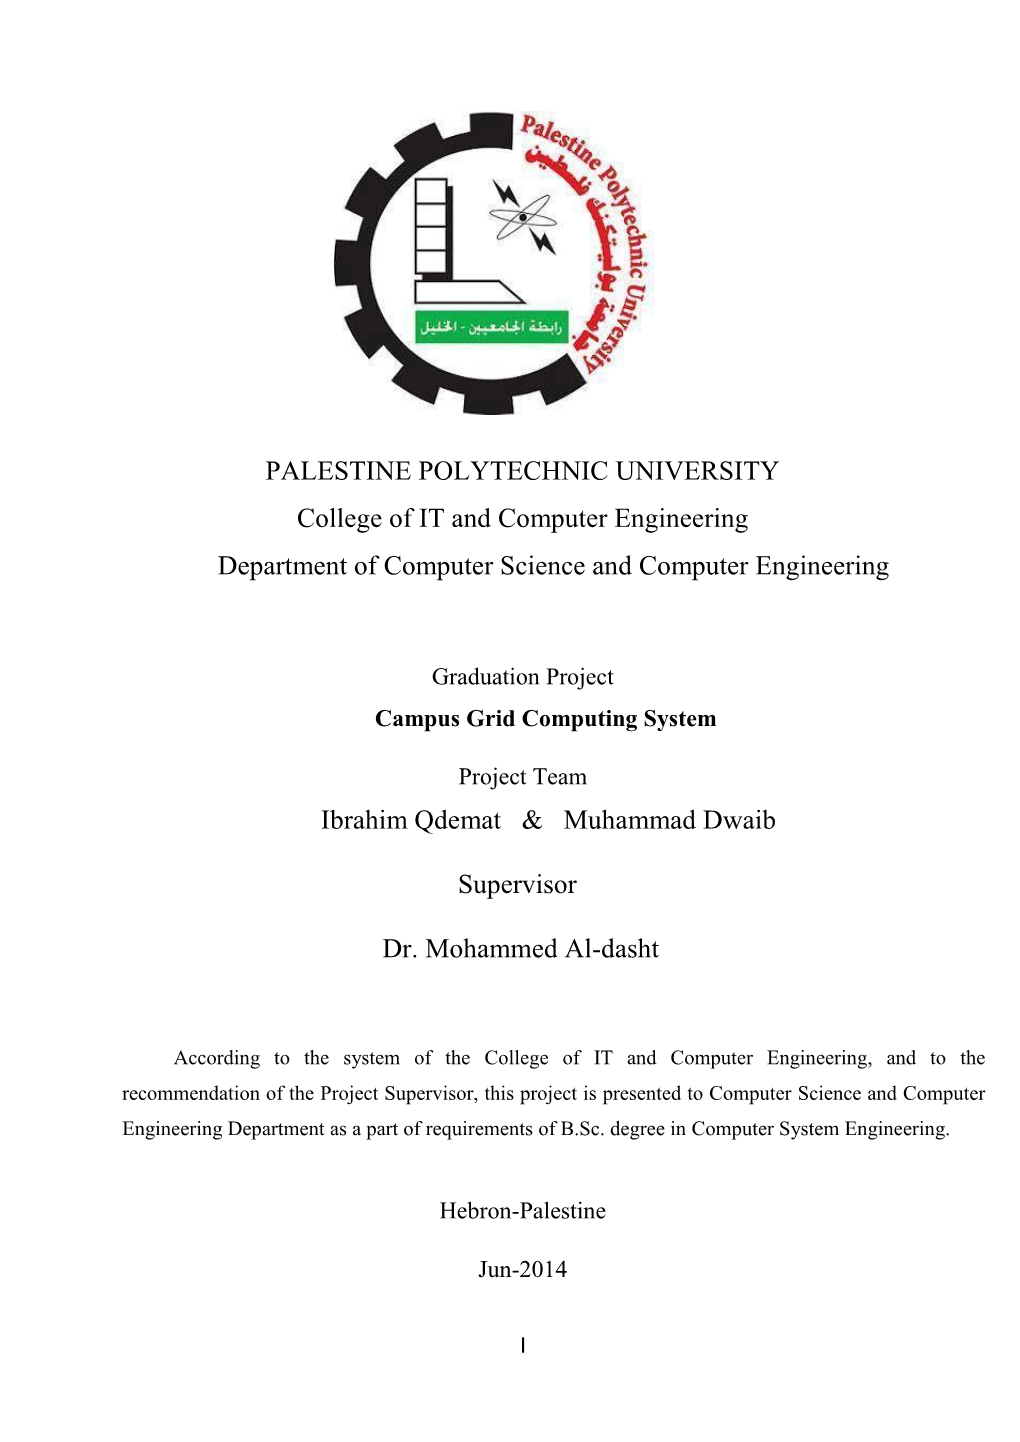 PALESTINE POLYTECHNIC UNIVERSITY College of IT and Computer Engineering Department of Computer Science and Computer Engineering